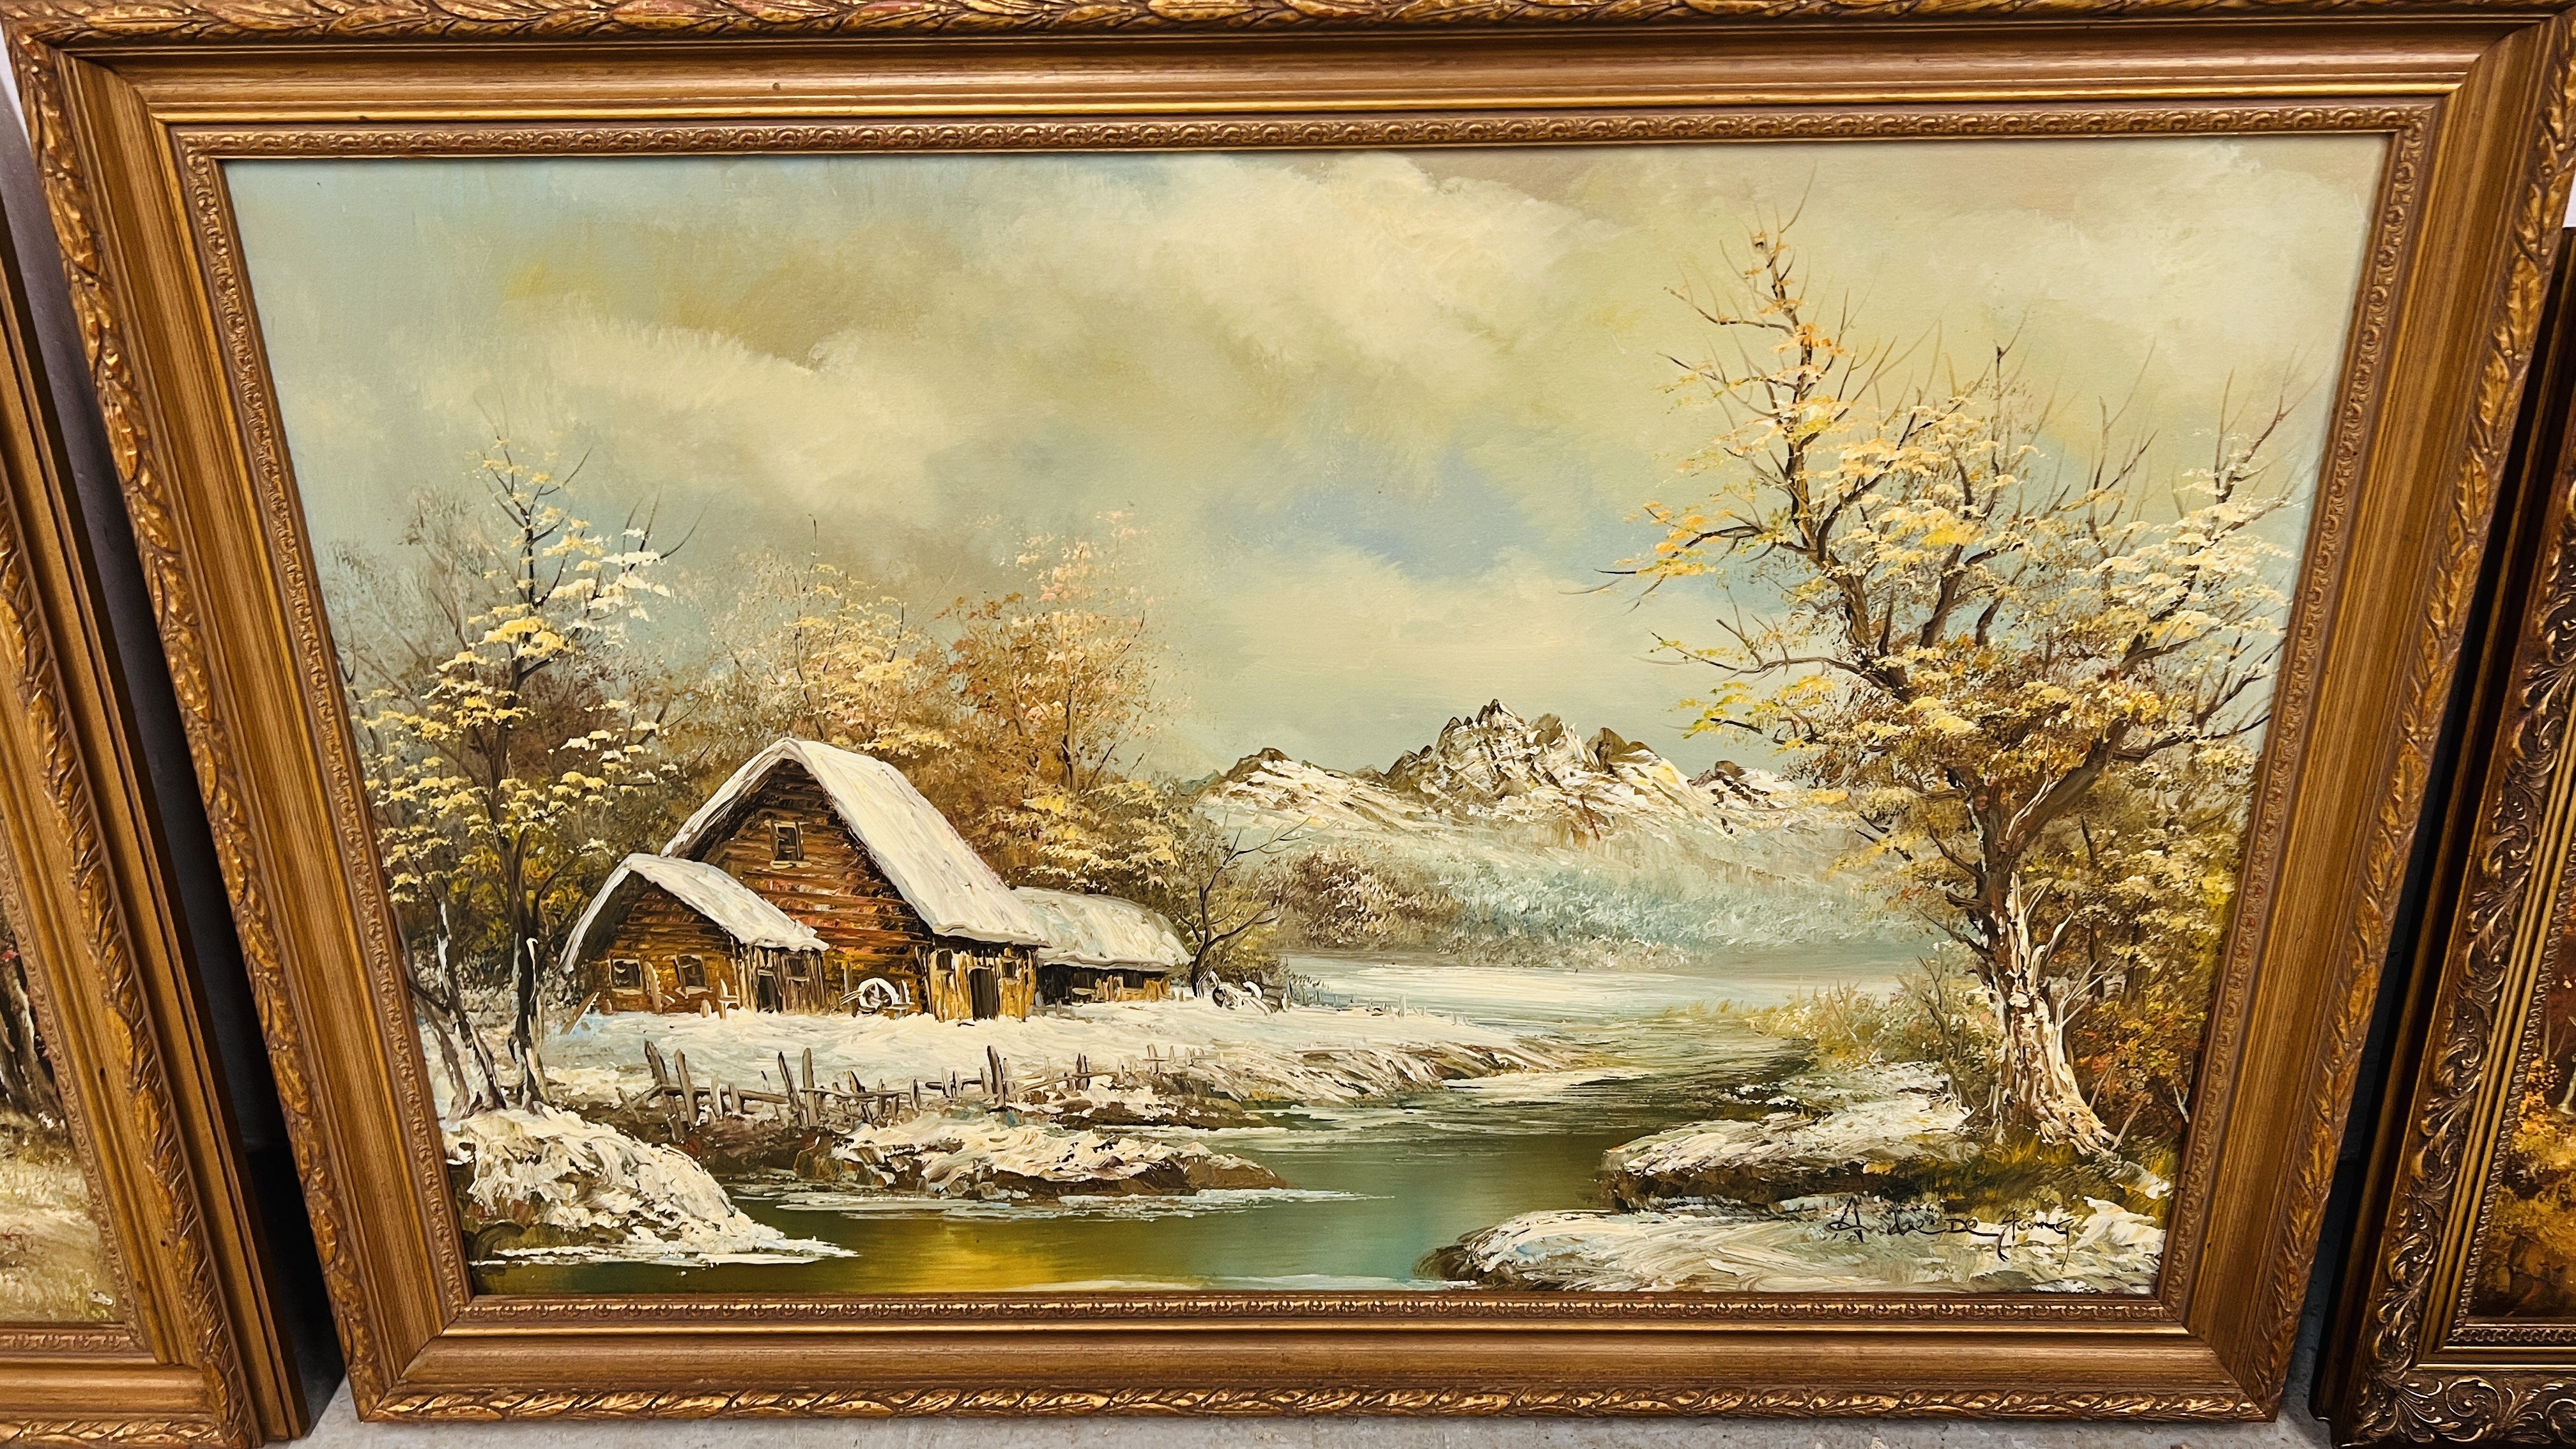 A PAIR OF GILT FRAMED OIL ON CANVAS PICTURES DEPICTING COTTAGES IN A SNOWY LANDSCAPE W 105. - Image 4 of 9